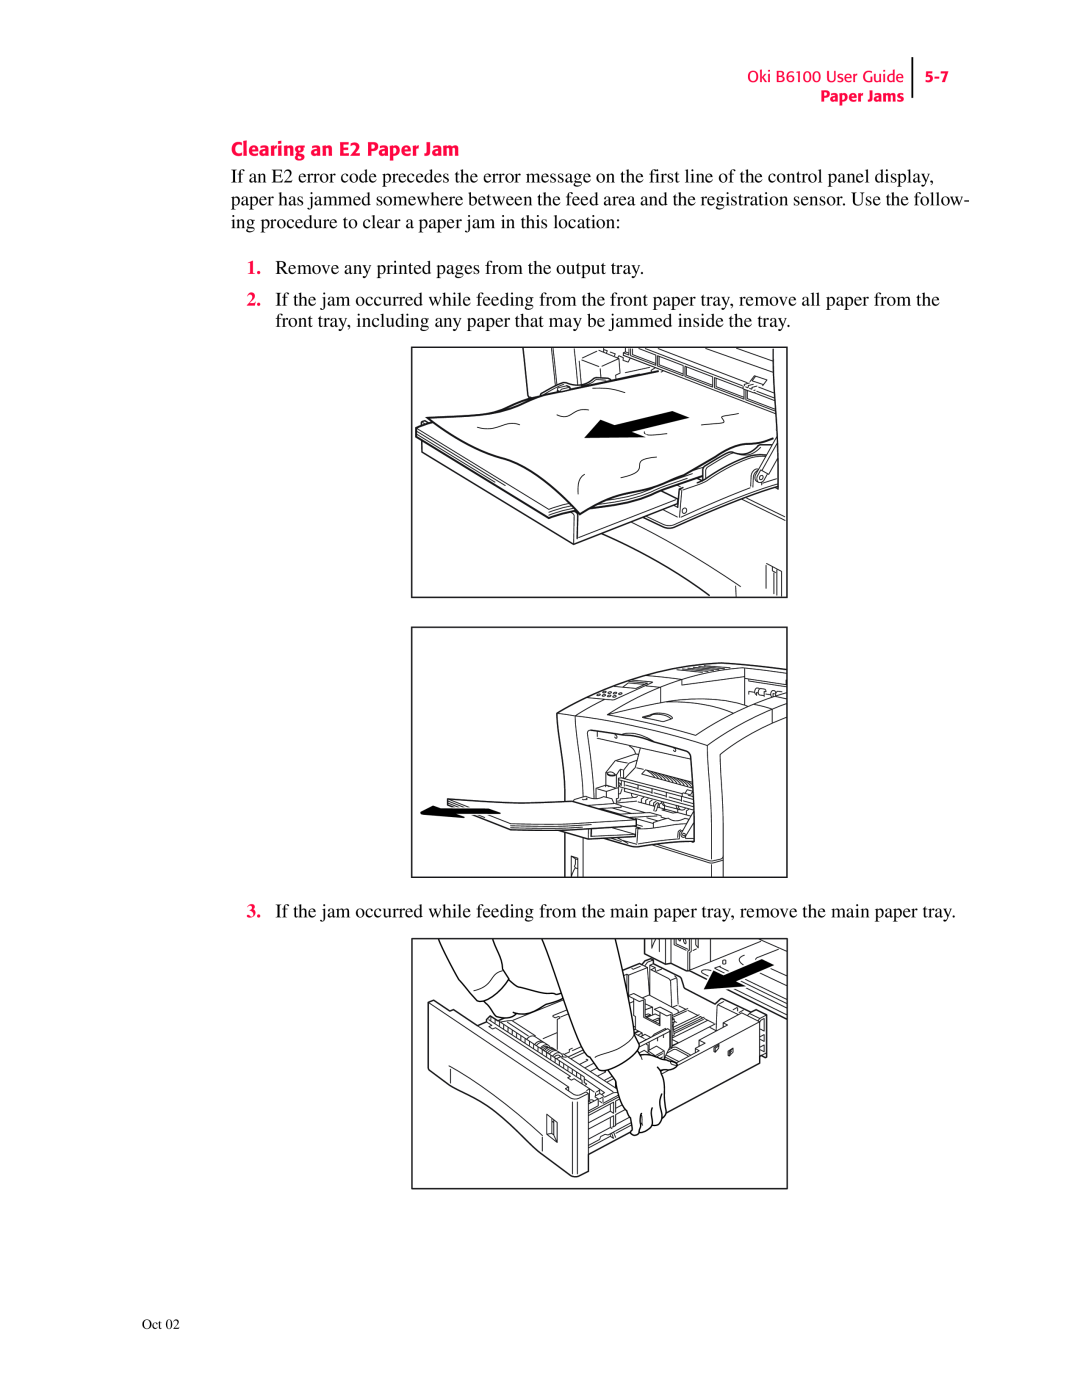 Oki 6100 manual Clearing an E2 Paper Jam, Remove any printed pages from the output tray 